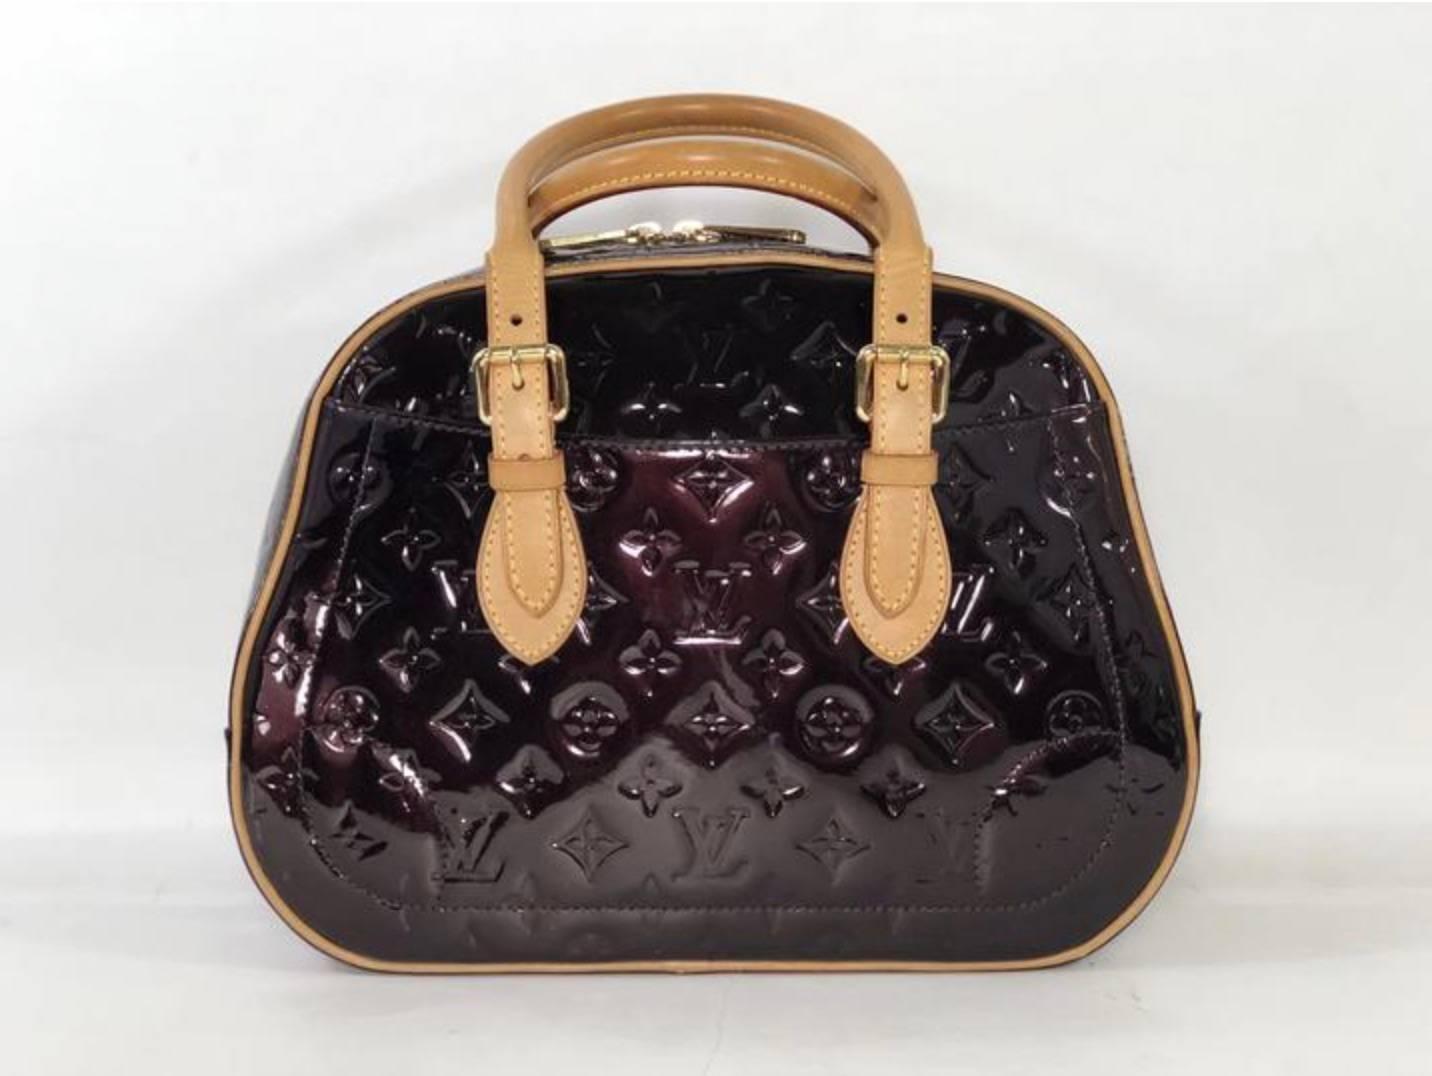 Louis Vuitton Vernis Summit Drive in Amarante Top Handle Handbag In Good Condition For Sale In Saint Charles, IL